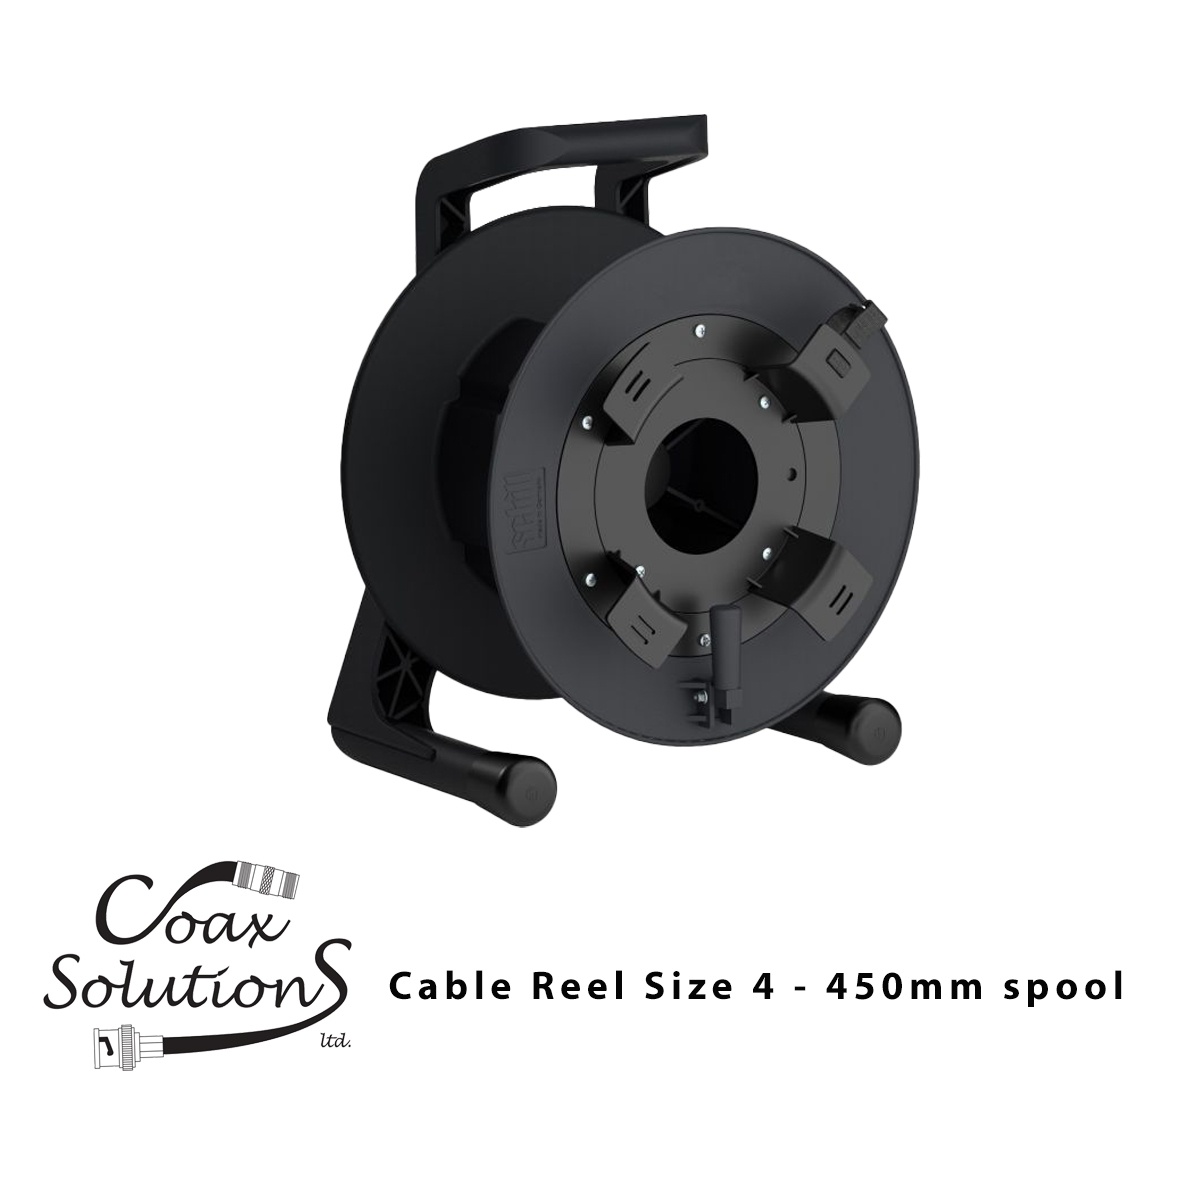 https://www.coaxsolutions.com/shop/cable-reels-1/cable-reel--rubber-size-4-450mm/library/images/cable%20reel%20gt450%20with%20text.jpg